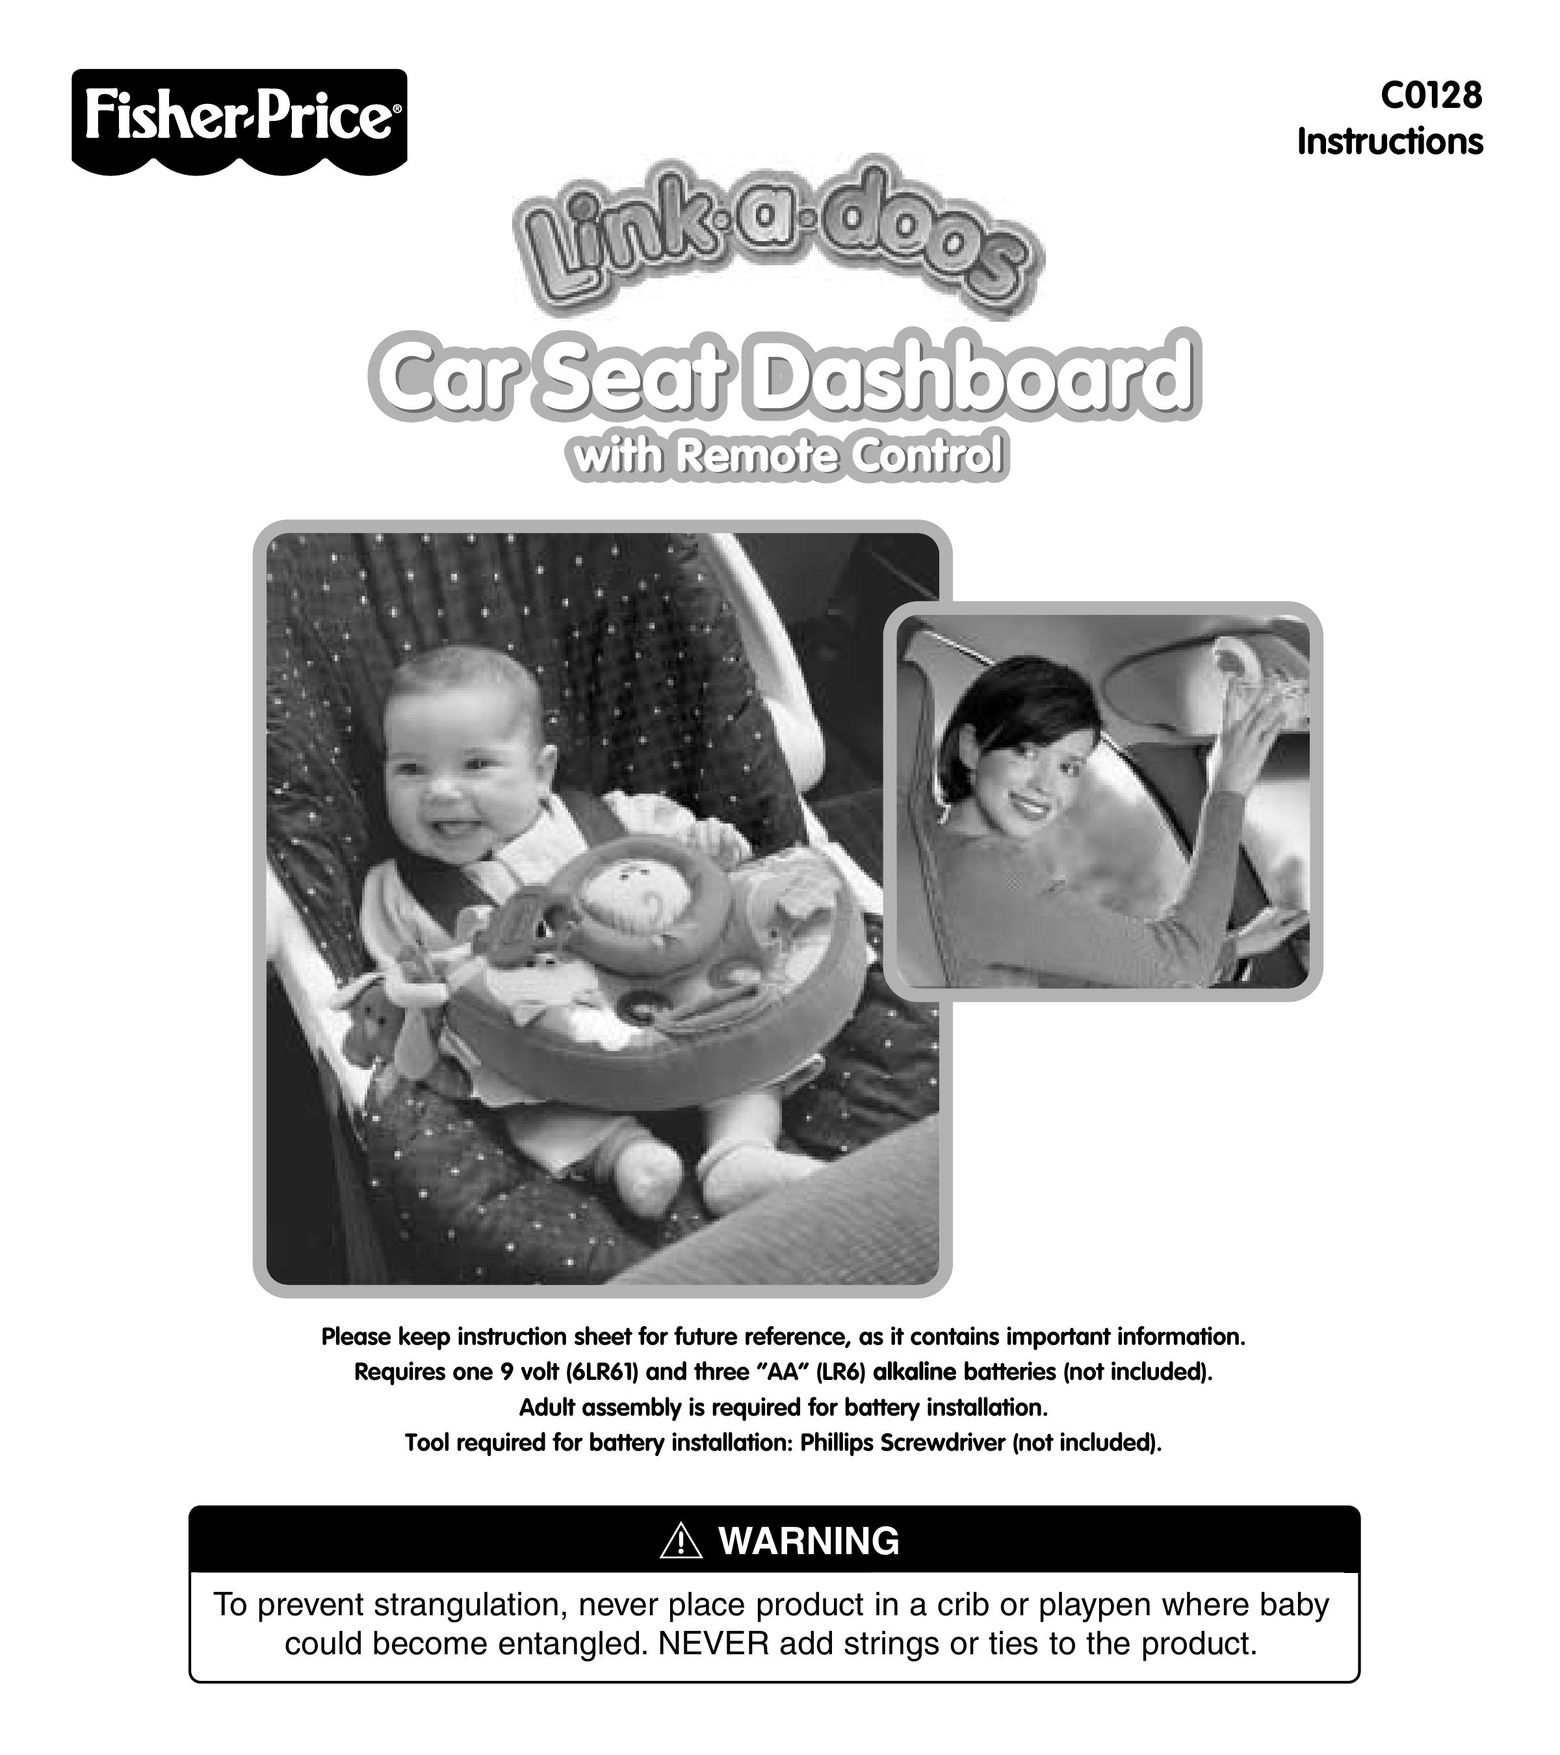 Fisher-Price C0128 Baby Carrier User Manual (Page 1)